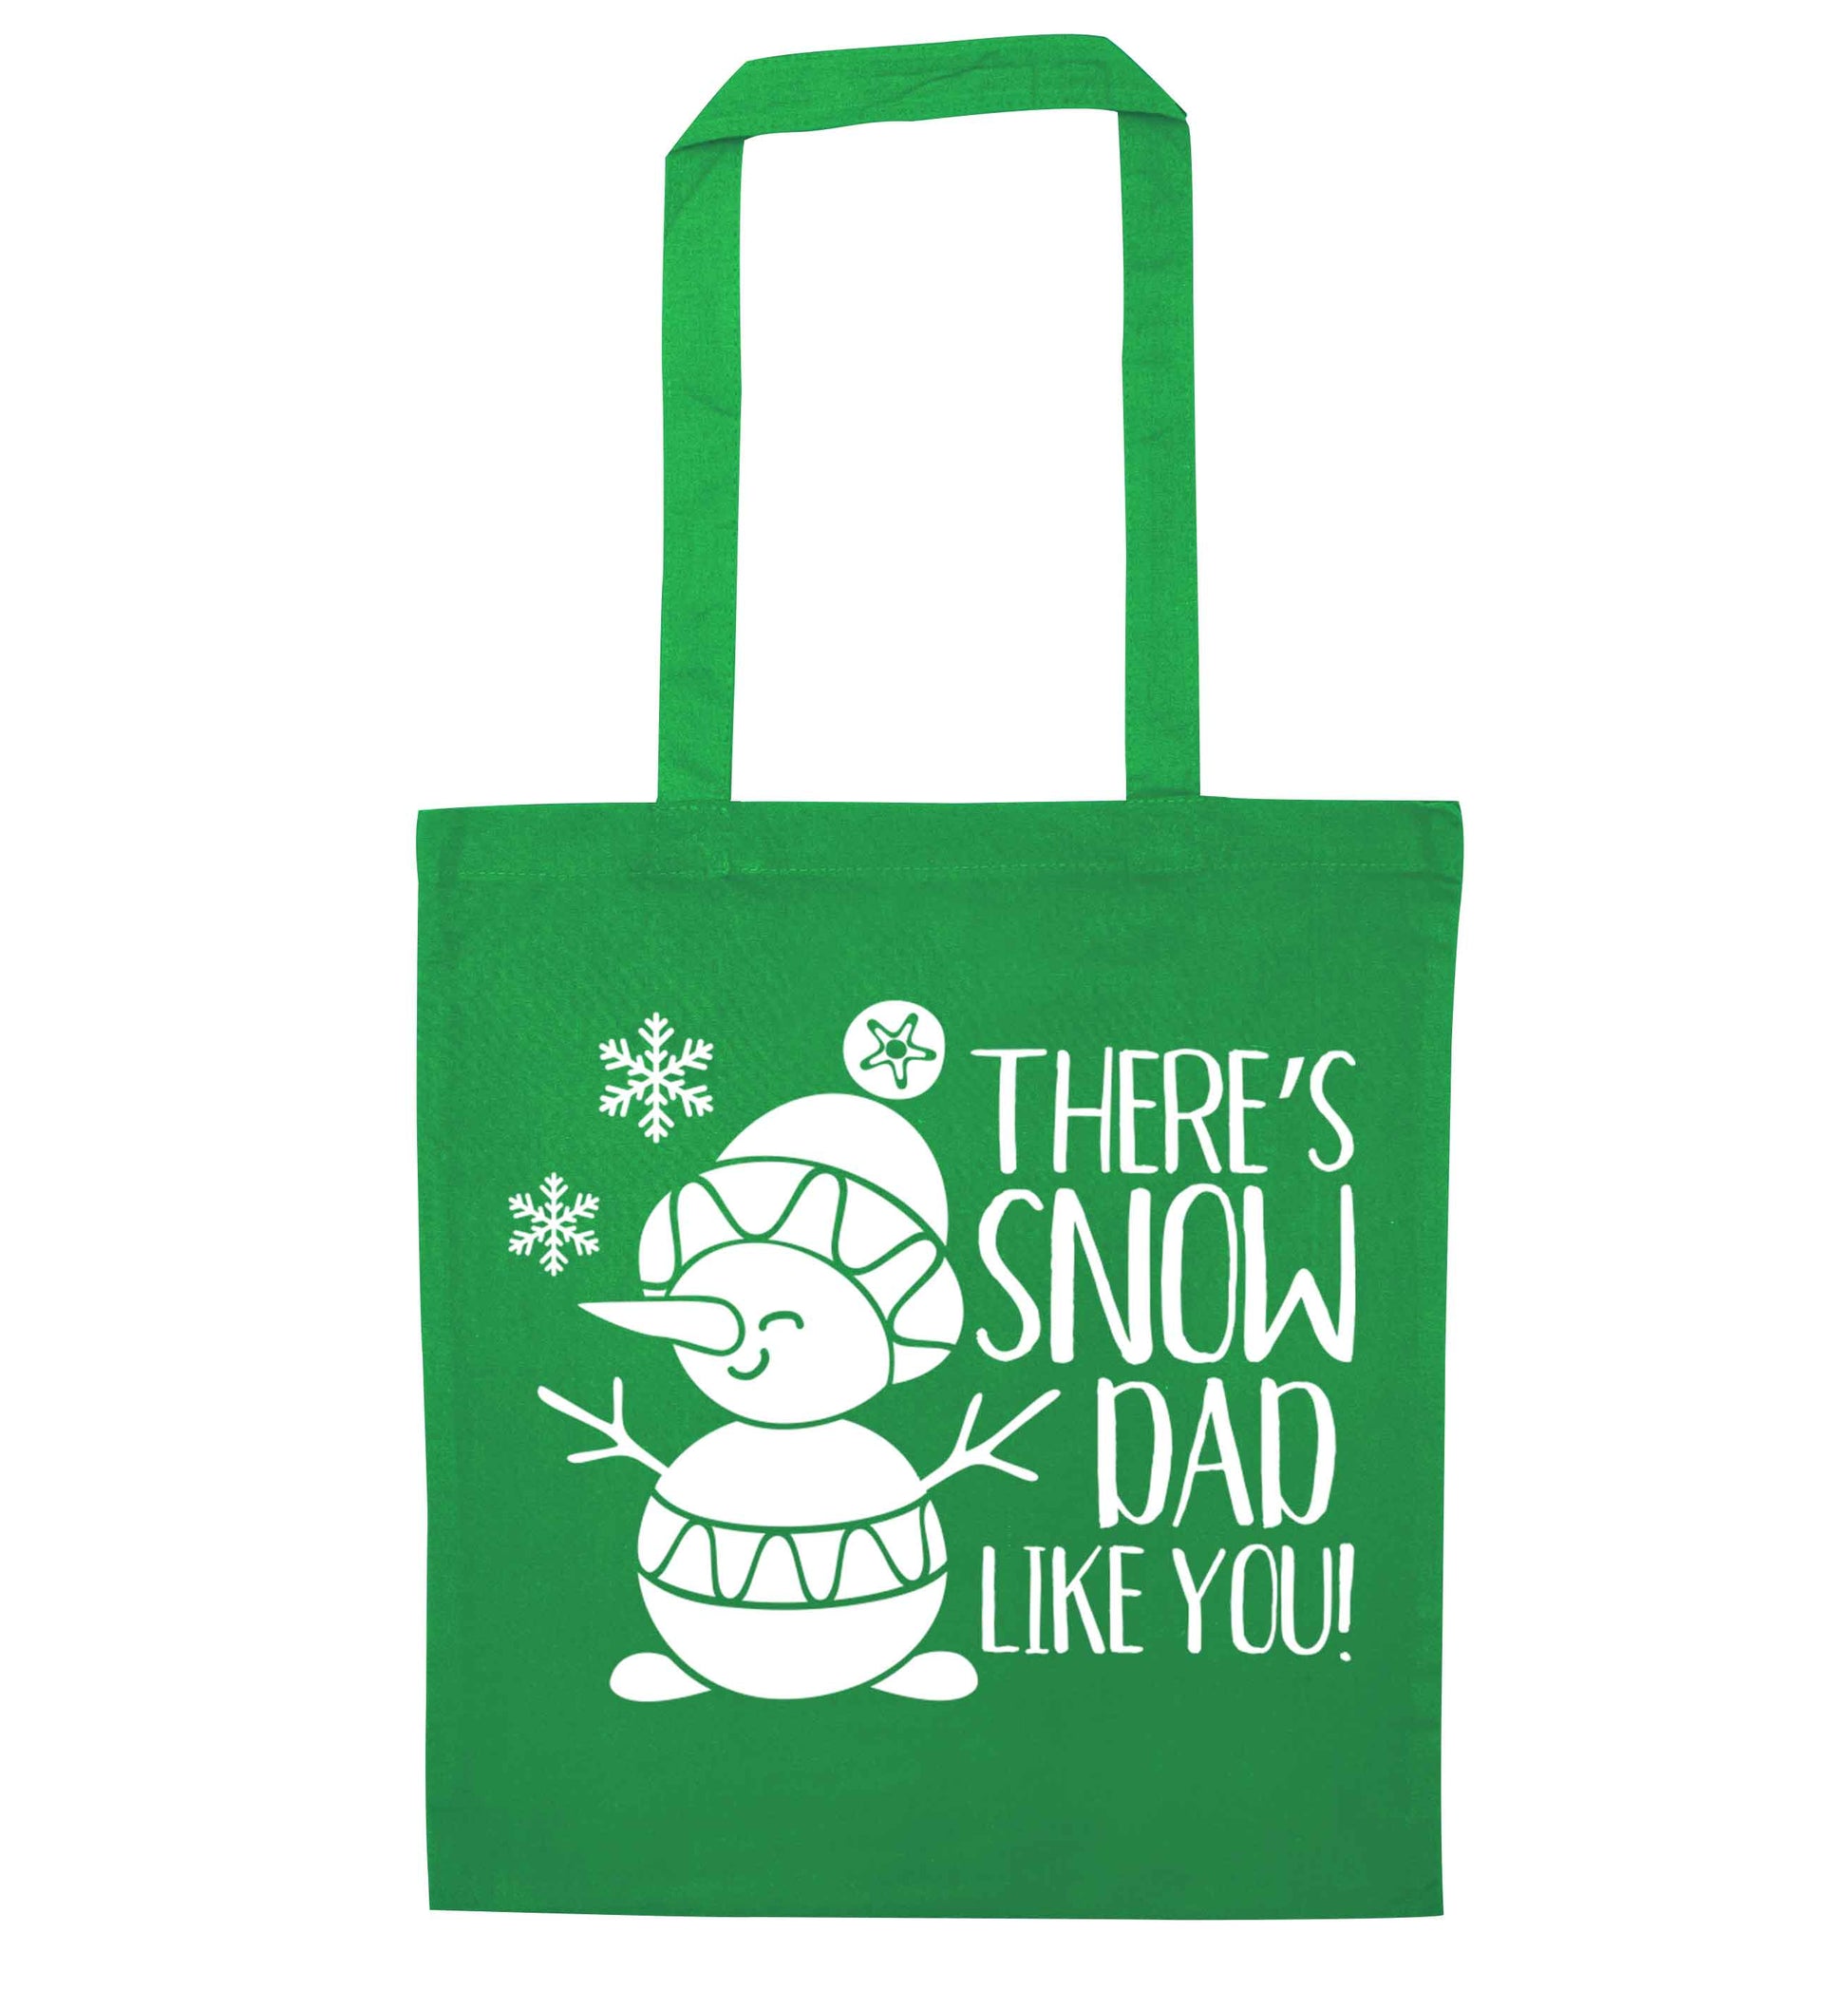 There's snow dad like you green tote bag